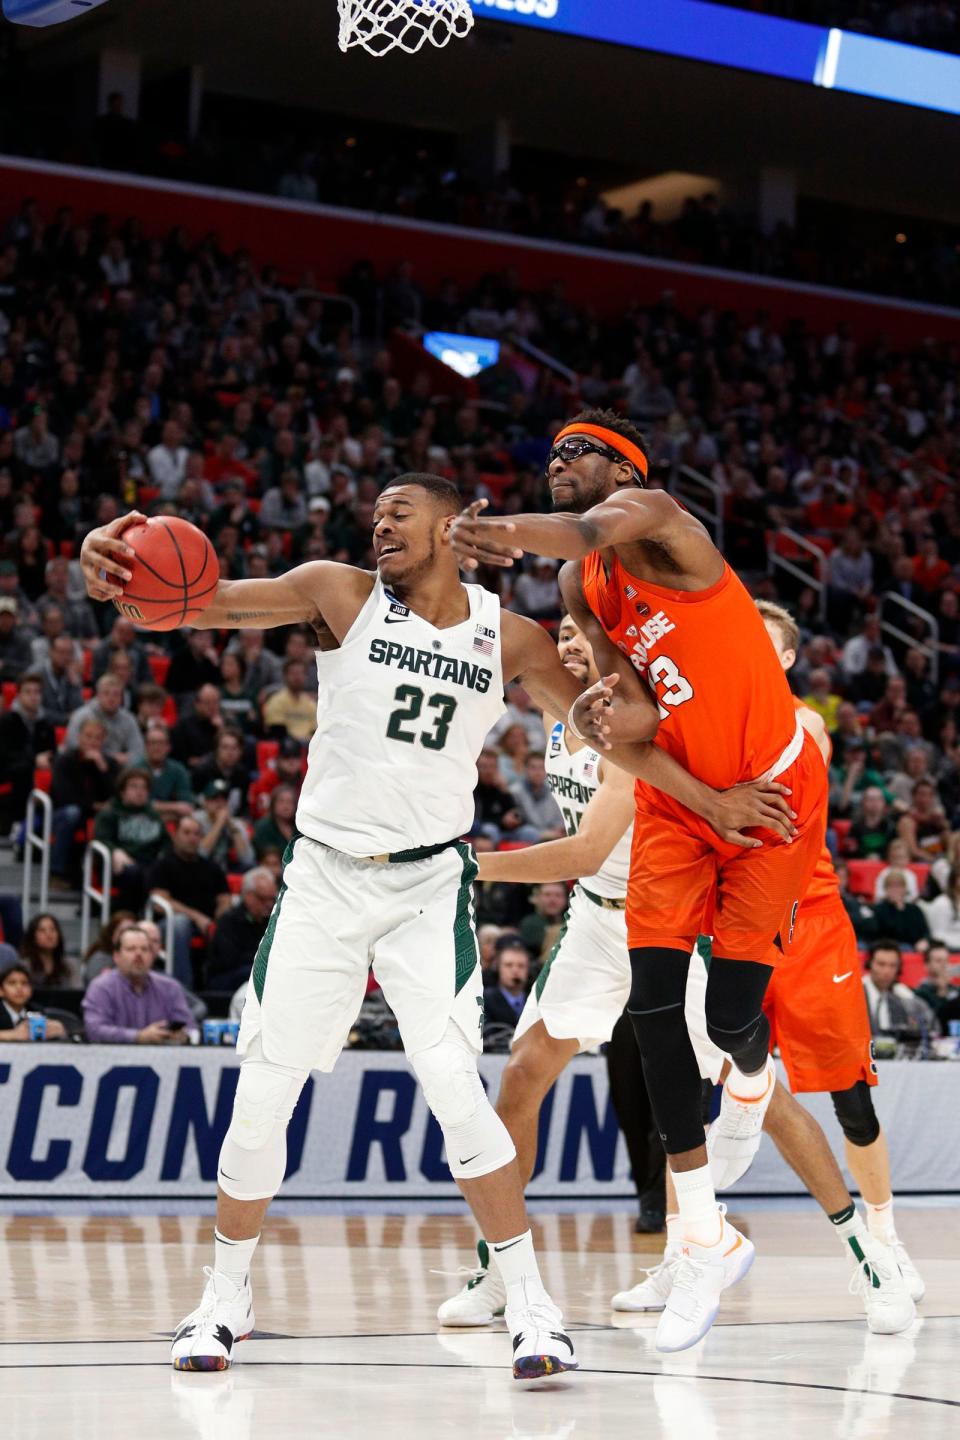 Michigan State forward Xavier Tillman (23) and Syracuse center Paschal Chukwu (13) battle for the ball in the first half in the second round of the 2018 NCAA tournament at Little Caesars Arena on Sunday, March 18, 2018.